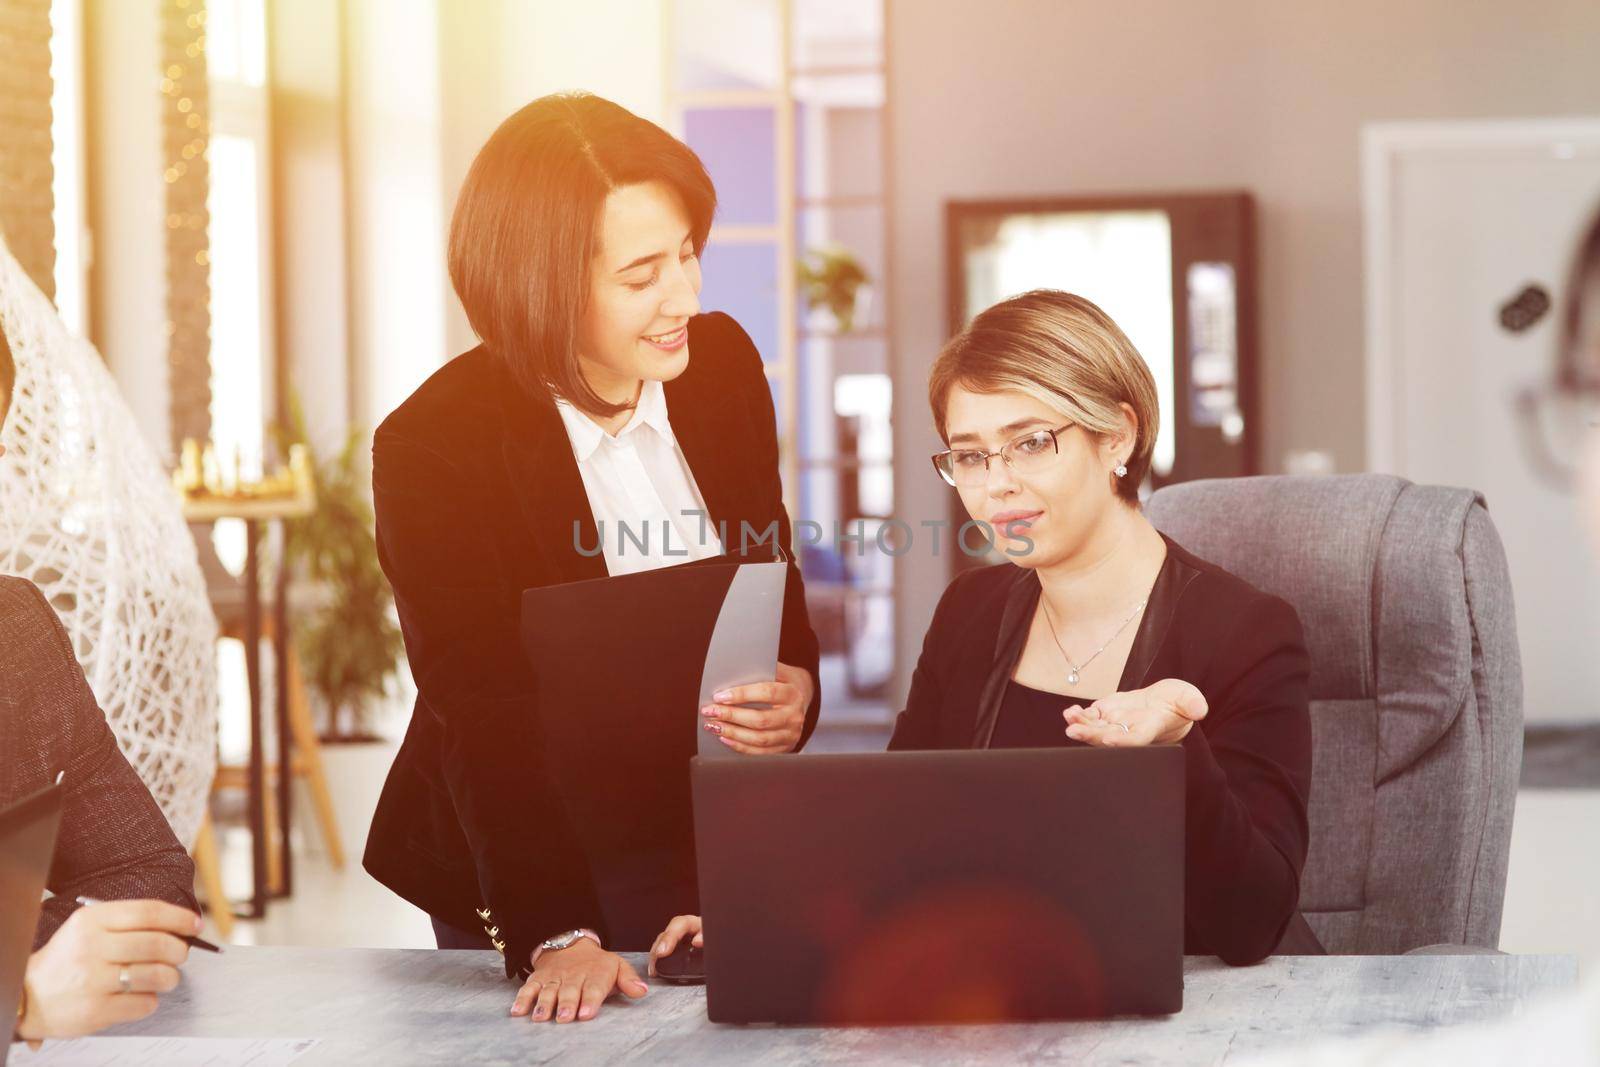 Two young business women in the office, analyzing information looking into a laptop, and smiling. 